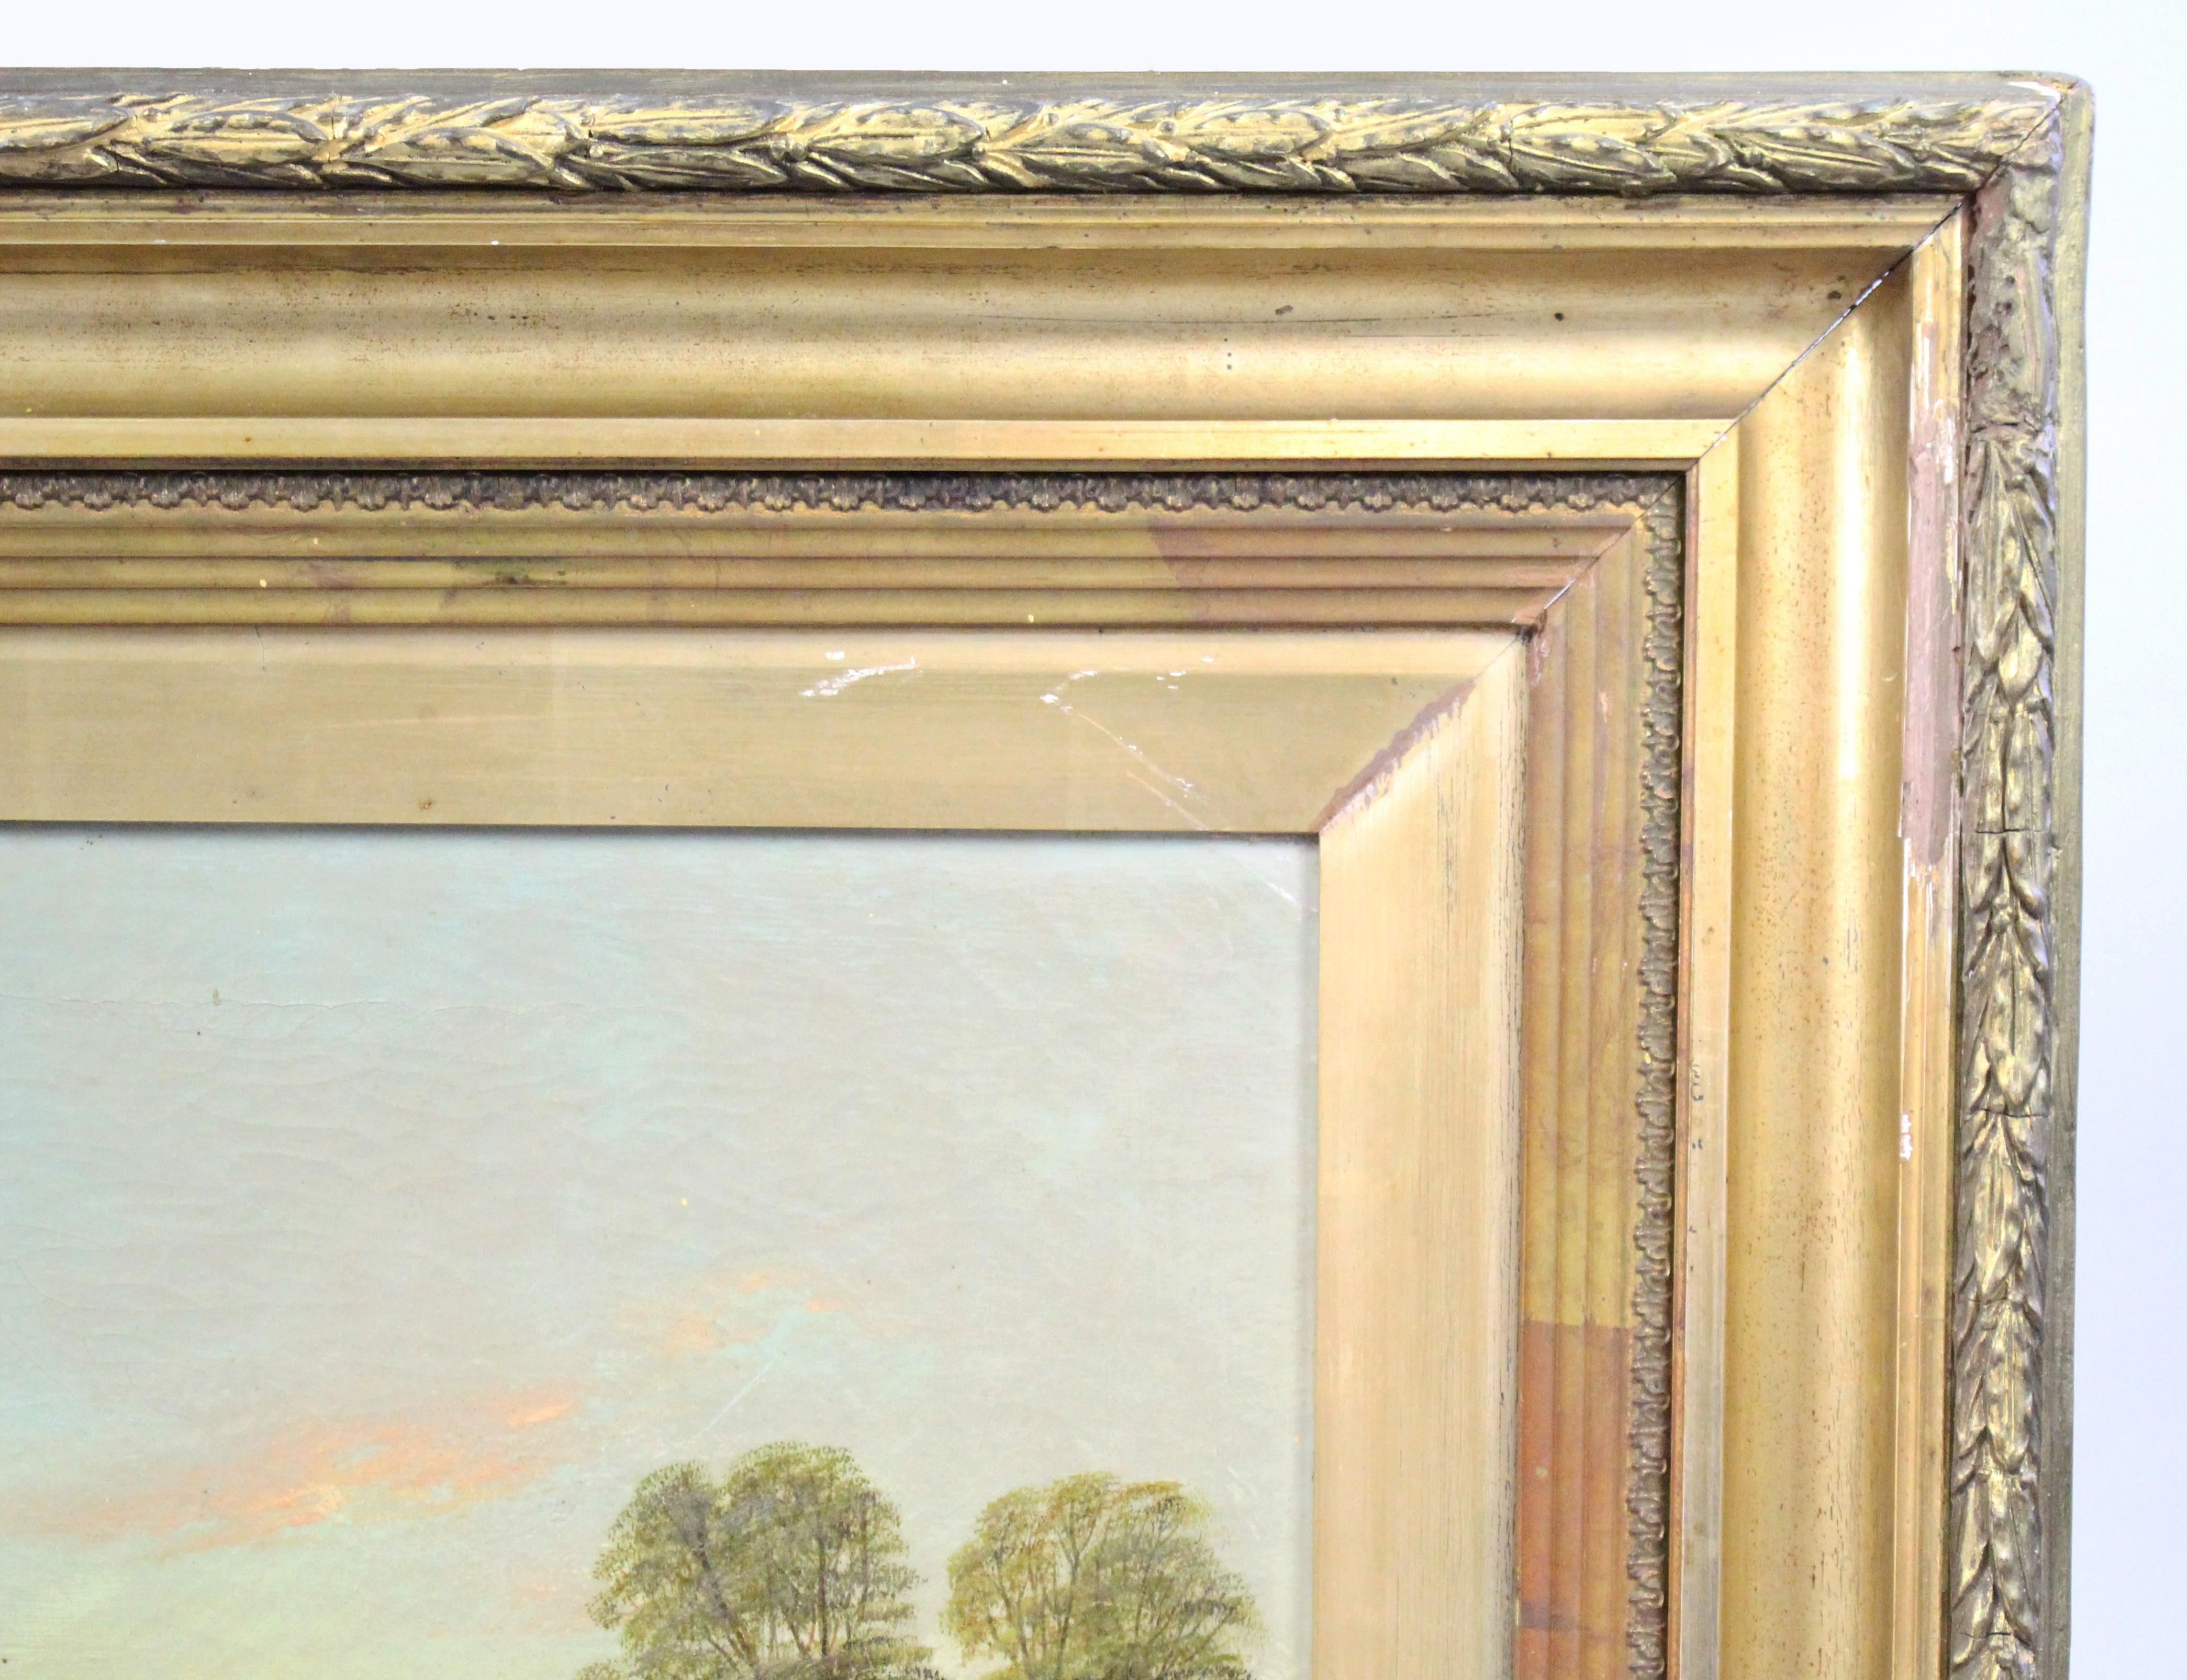 Late 19th Century English Landscape Painting Set in Gilt Frame For Sale 4